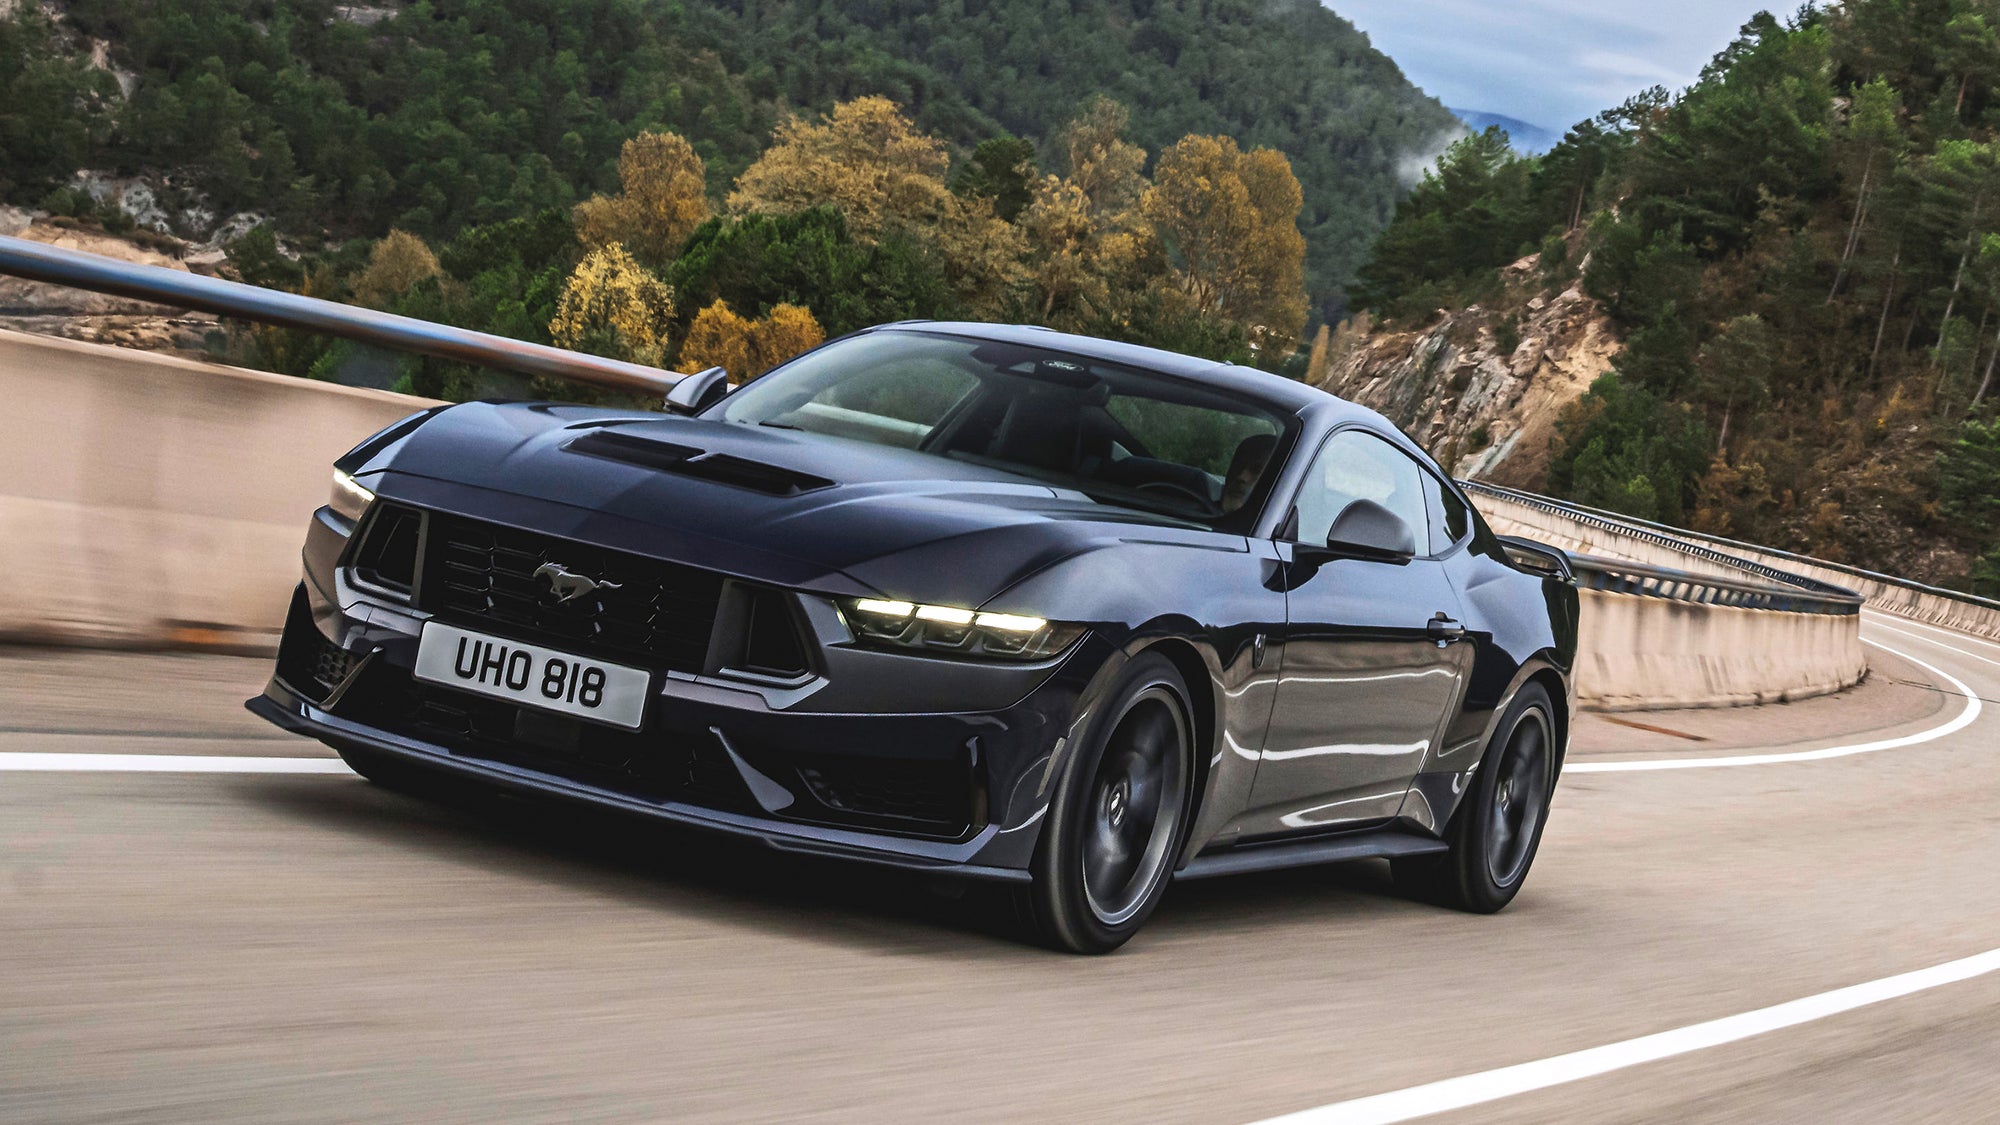 The Ford Mustang GT in the UK market has suffered a 41 hp decrease, and its price has increased by an additional $25,000.